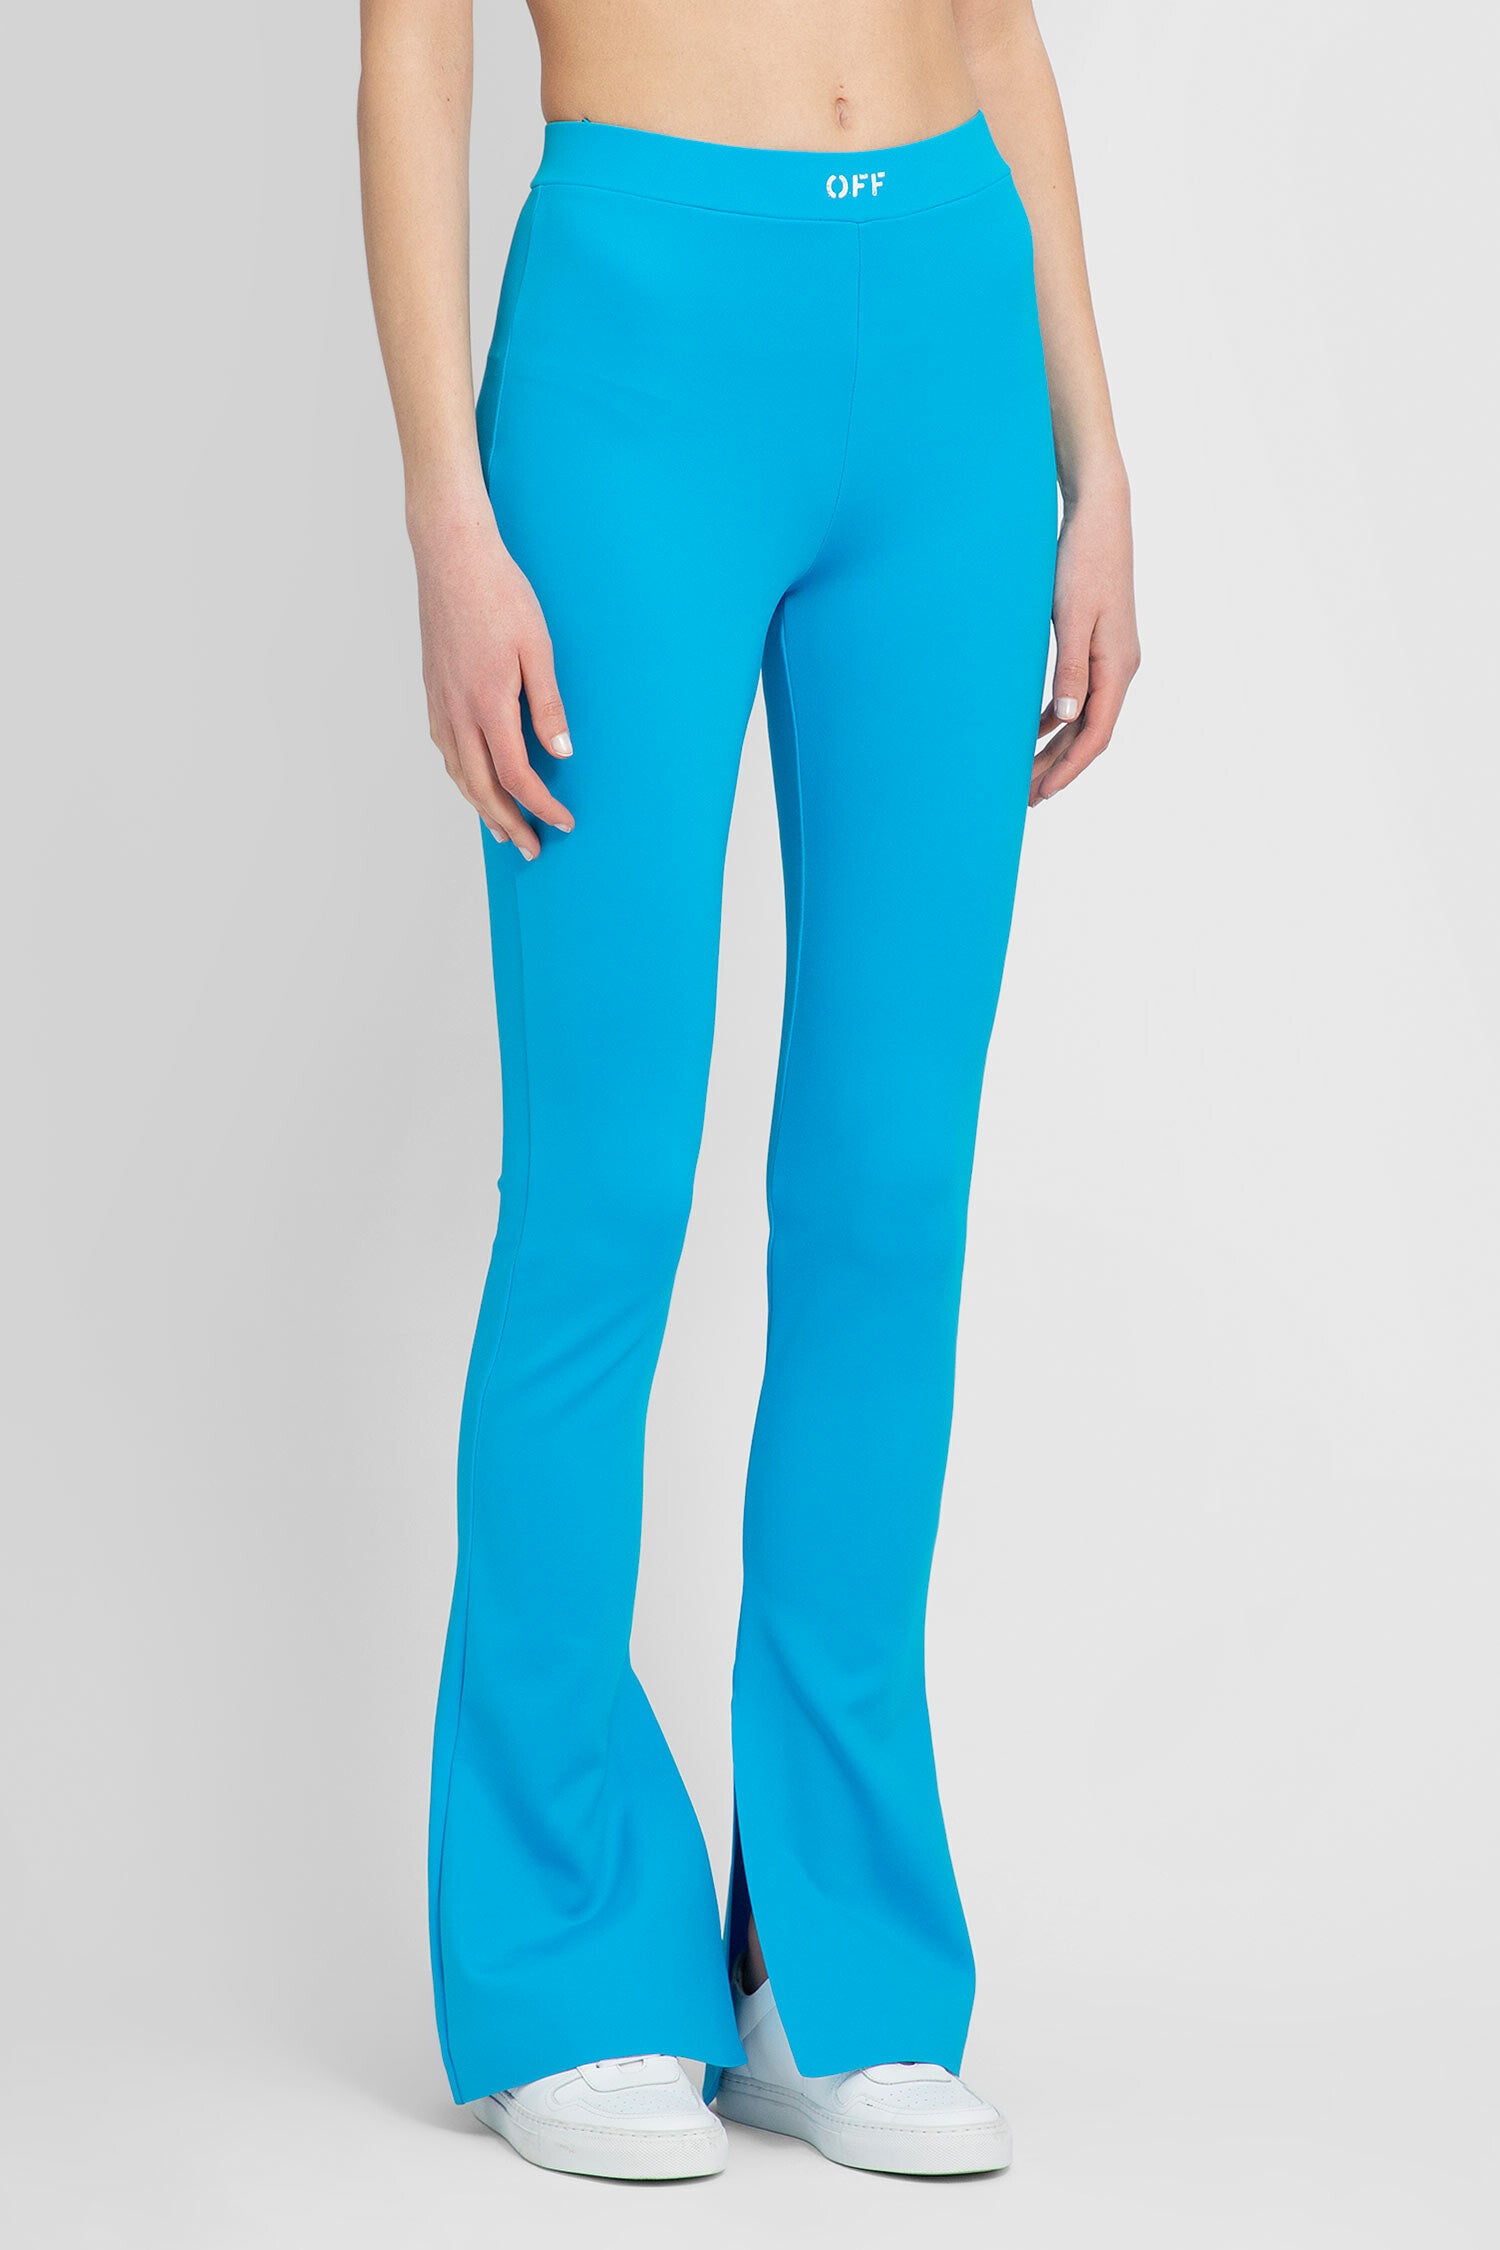 OFF-WHITE WOMAN BLUE TROUSERS